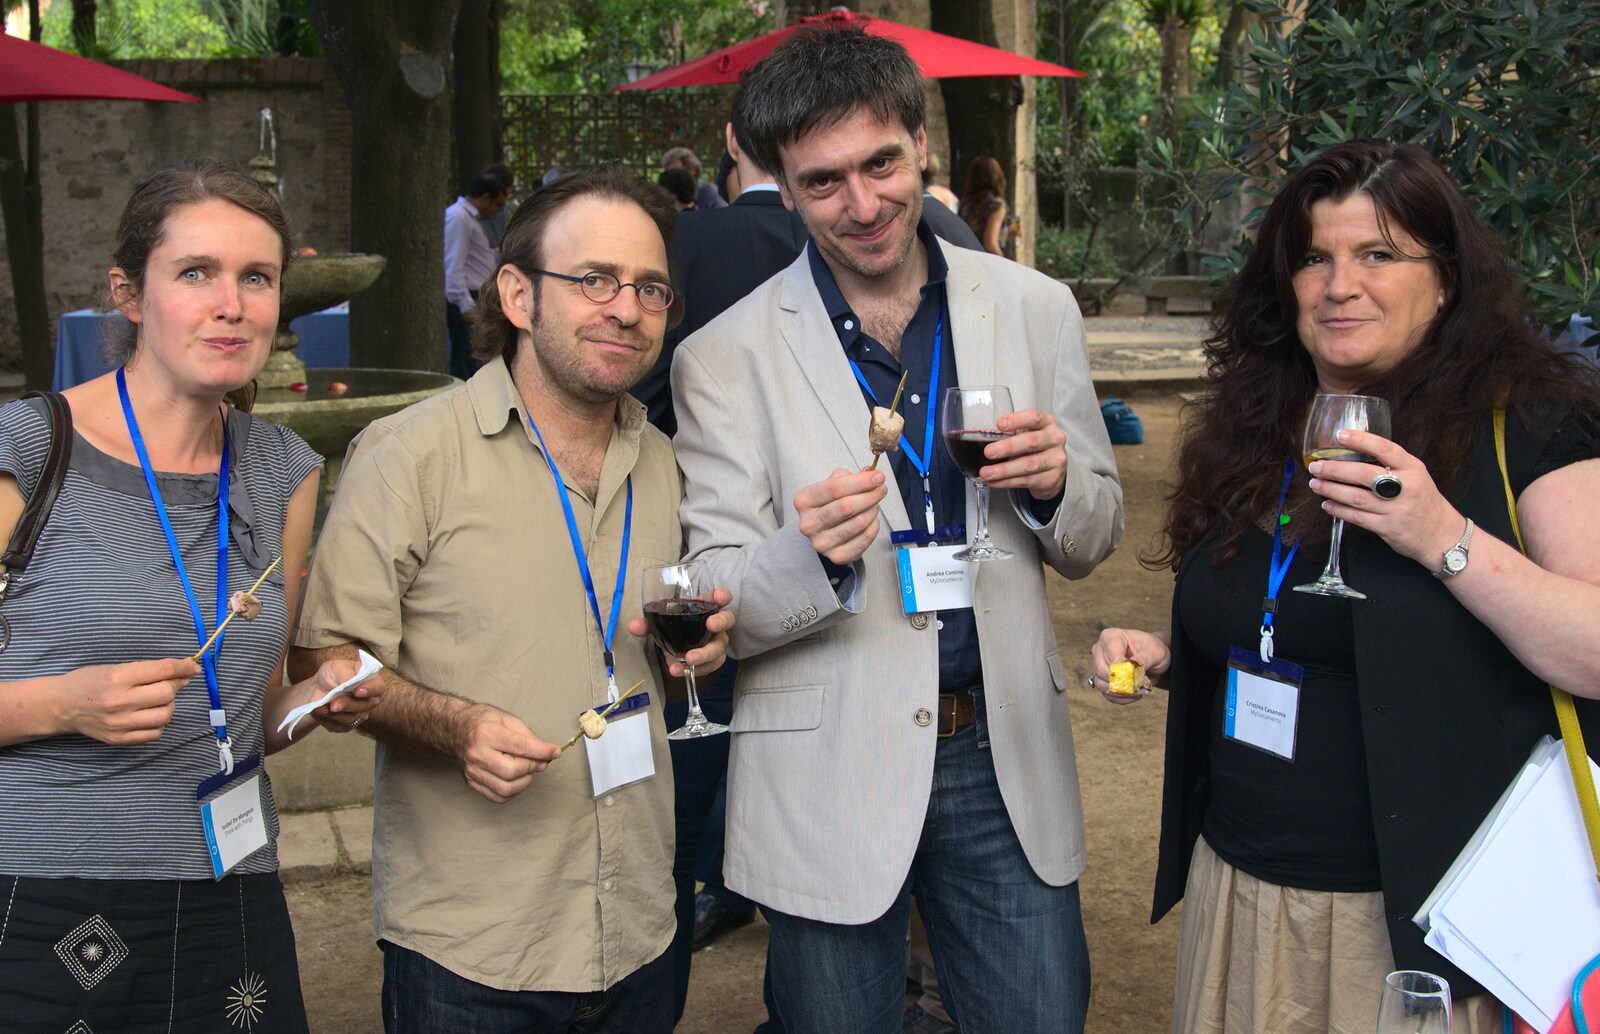 We hang around with fruit on a stick from The Open Education Challenge, Barcelona, Catalonia - 13th July 2014